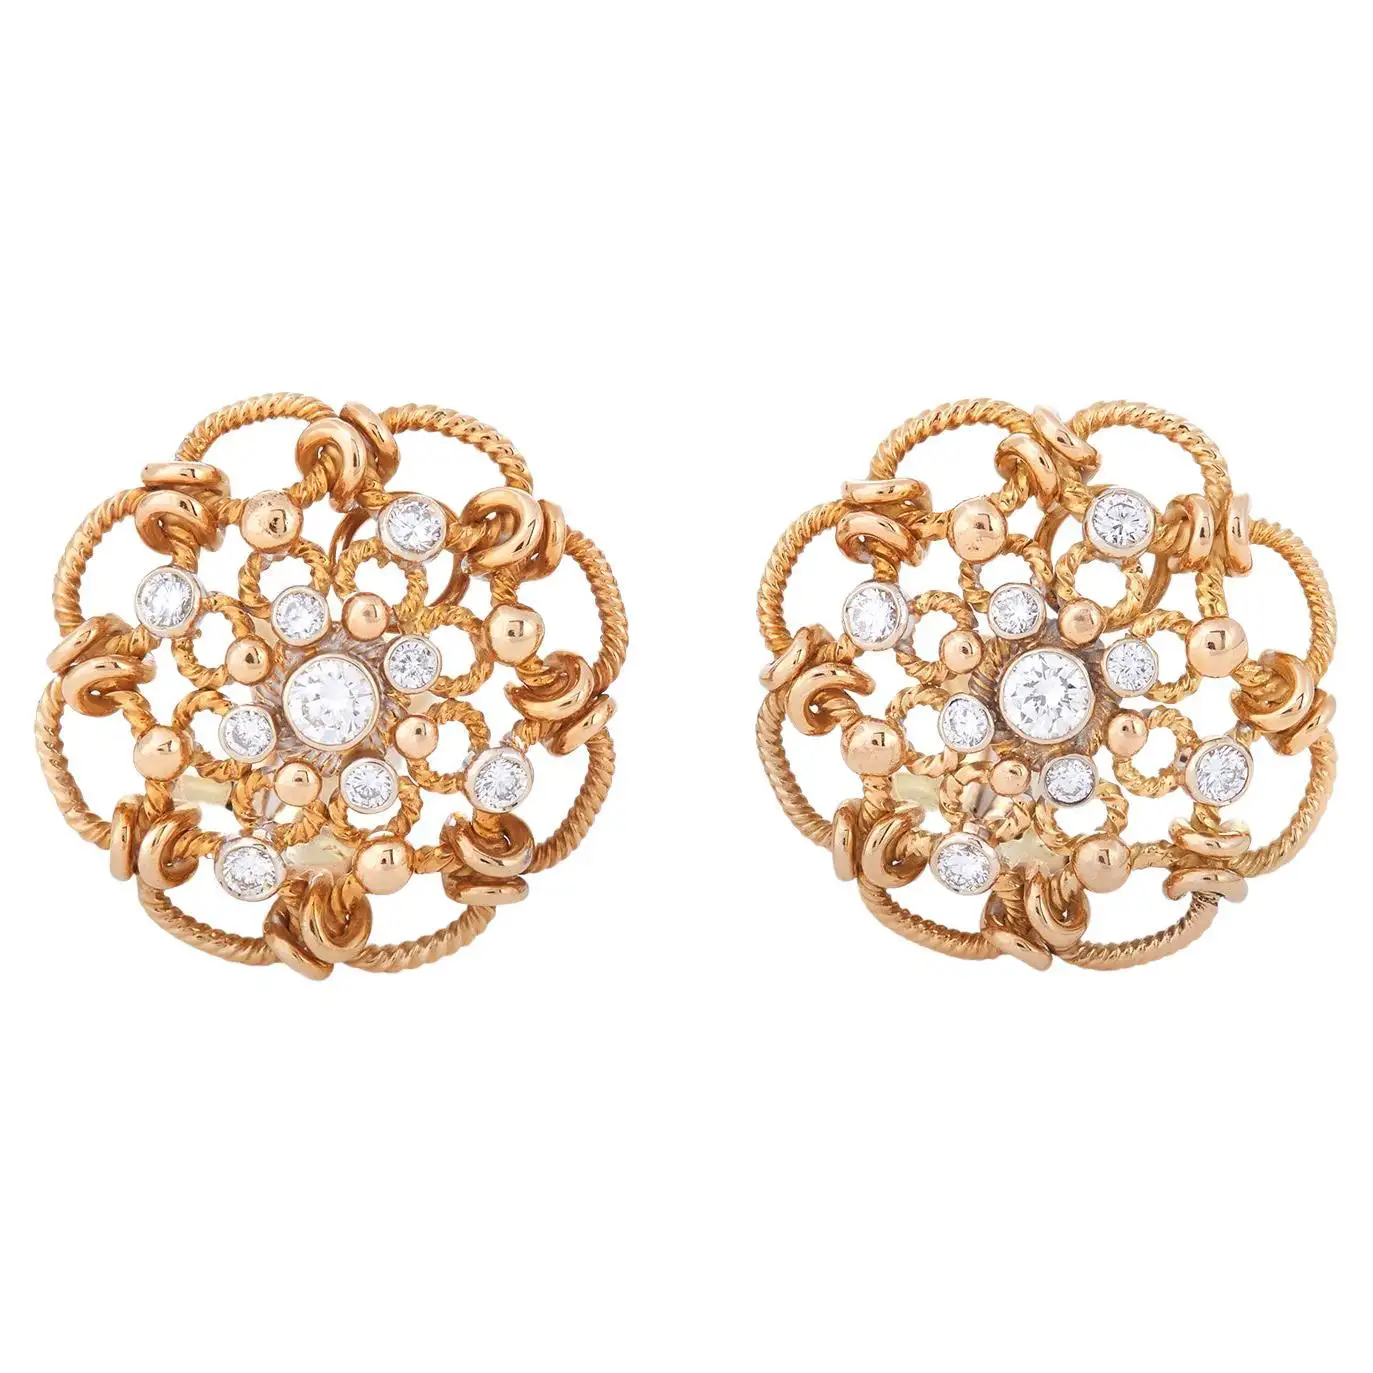 Vintage-Yellow-Gold-and-Diamond-Earrings-1.webp